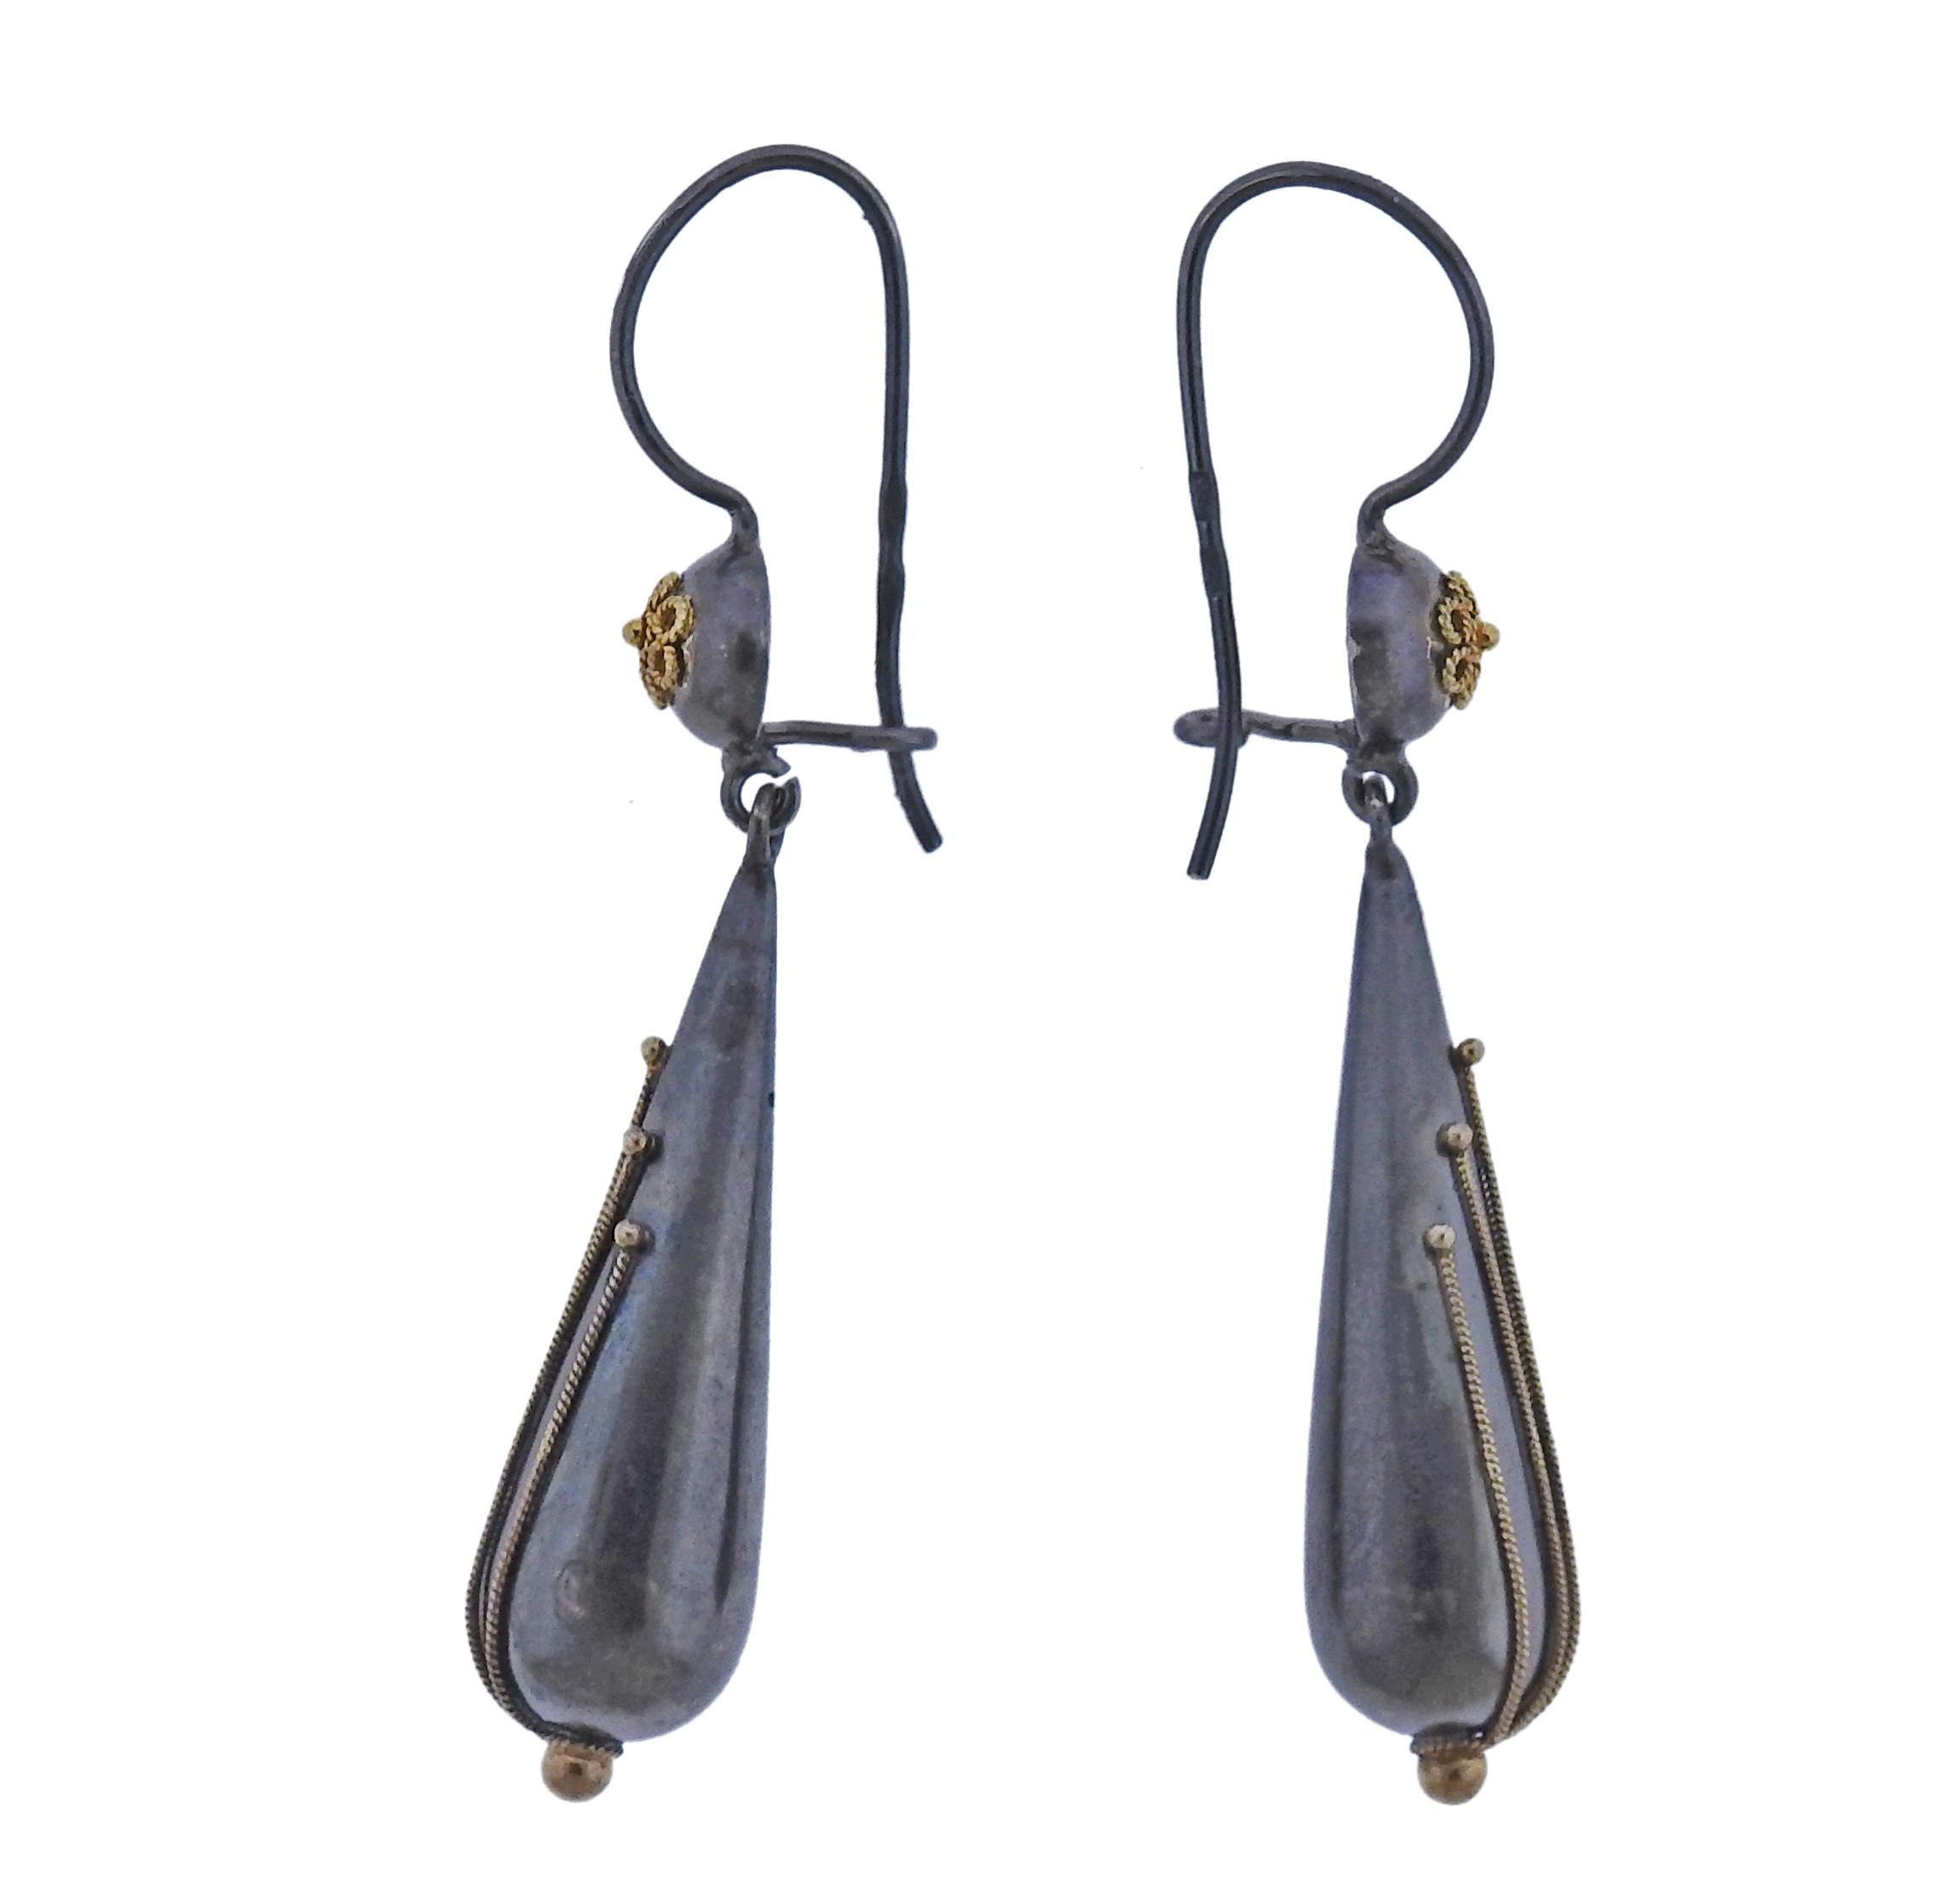 The jewelry offered by Castellani today, is created by the same gold techniques as in the 1850’s as well as by the ancient Etruscans. Pair of 18k gold and silver filigree drop earrings by Castellani. Earrings are 55mm long, teardrop is 34mm x 10mm.